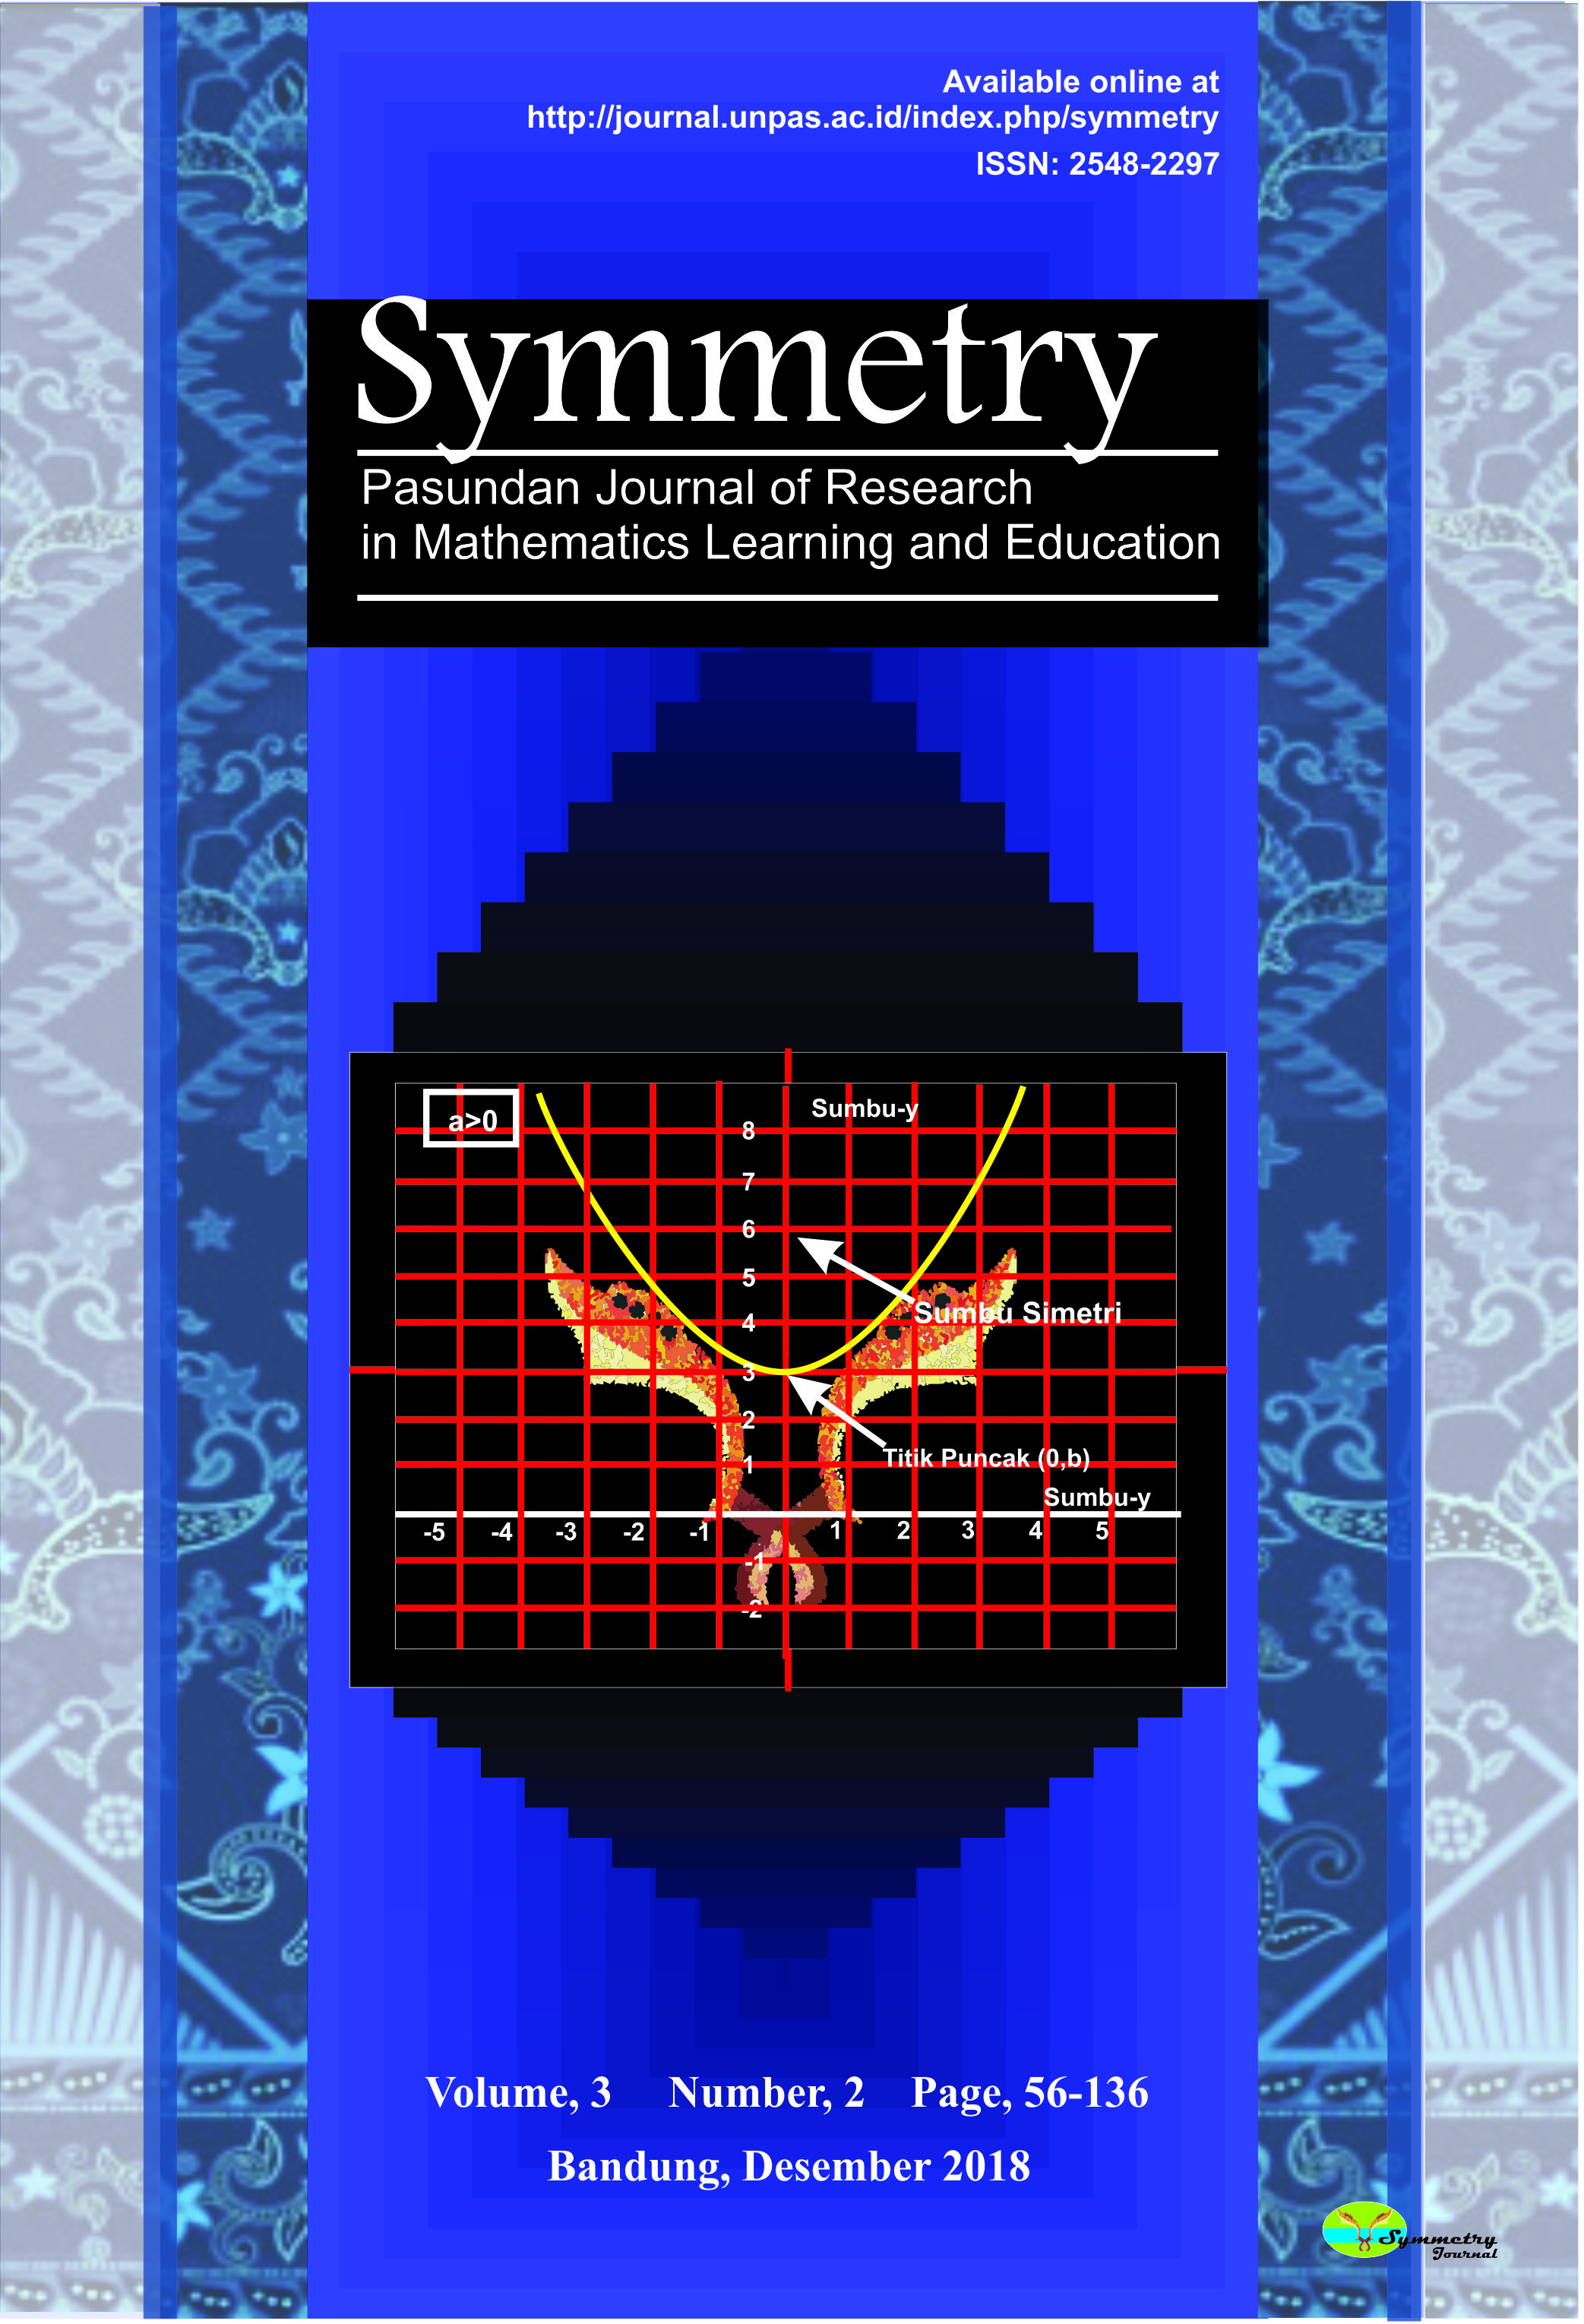 					View Vol. 6 No. 1 (2021): Symmetry: Pasundan Journal of Research in Mathematics Learning and Education
				